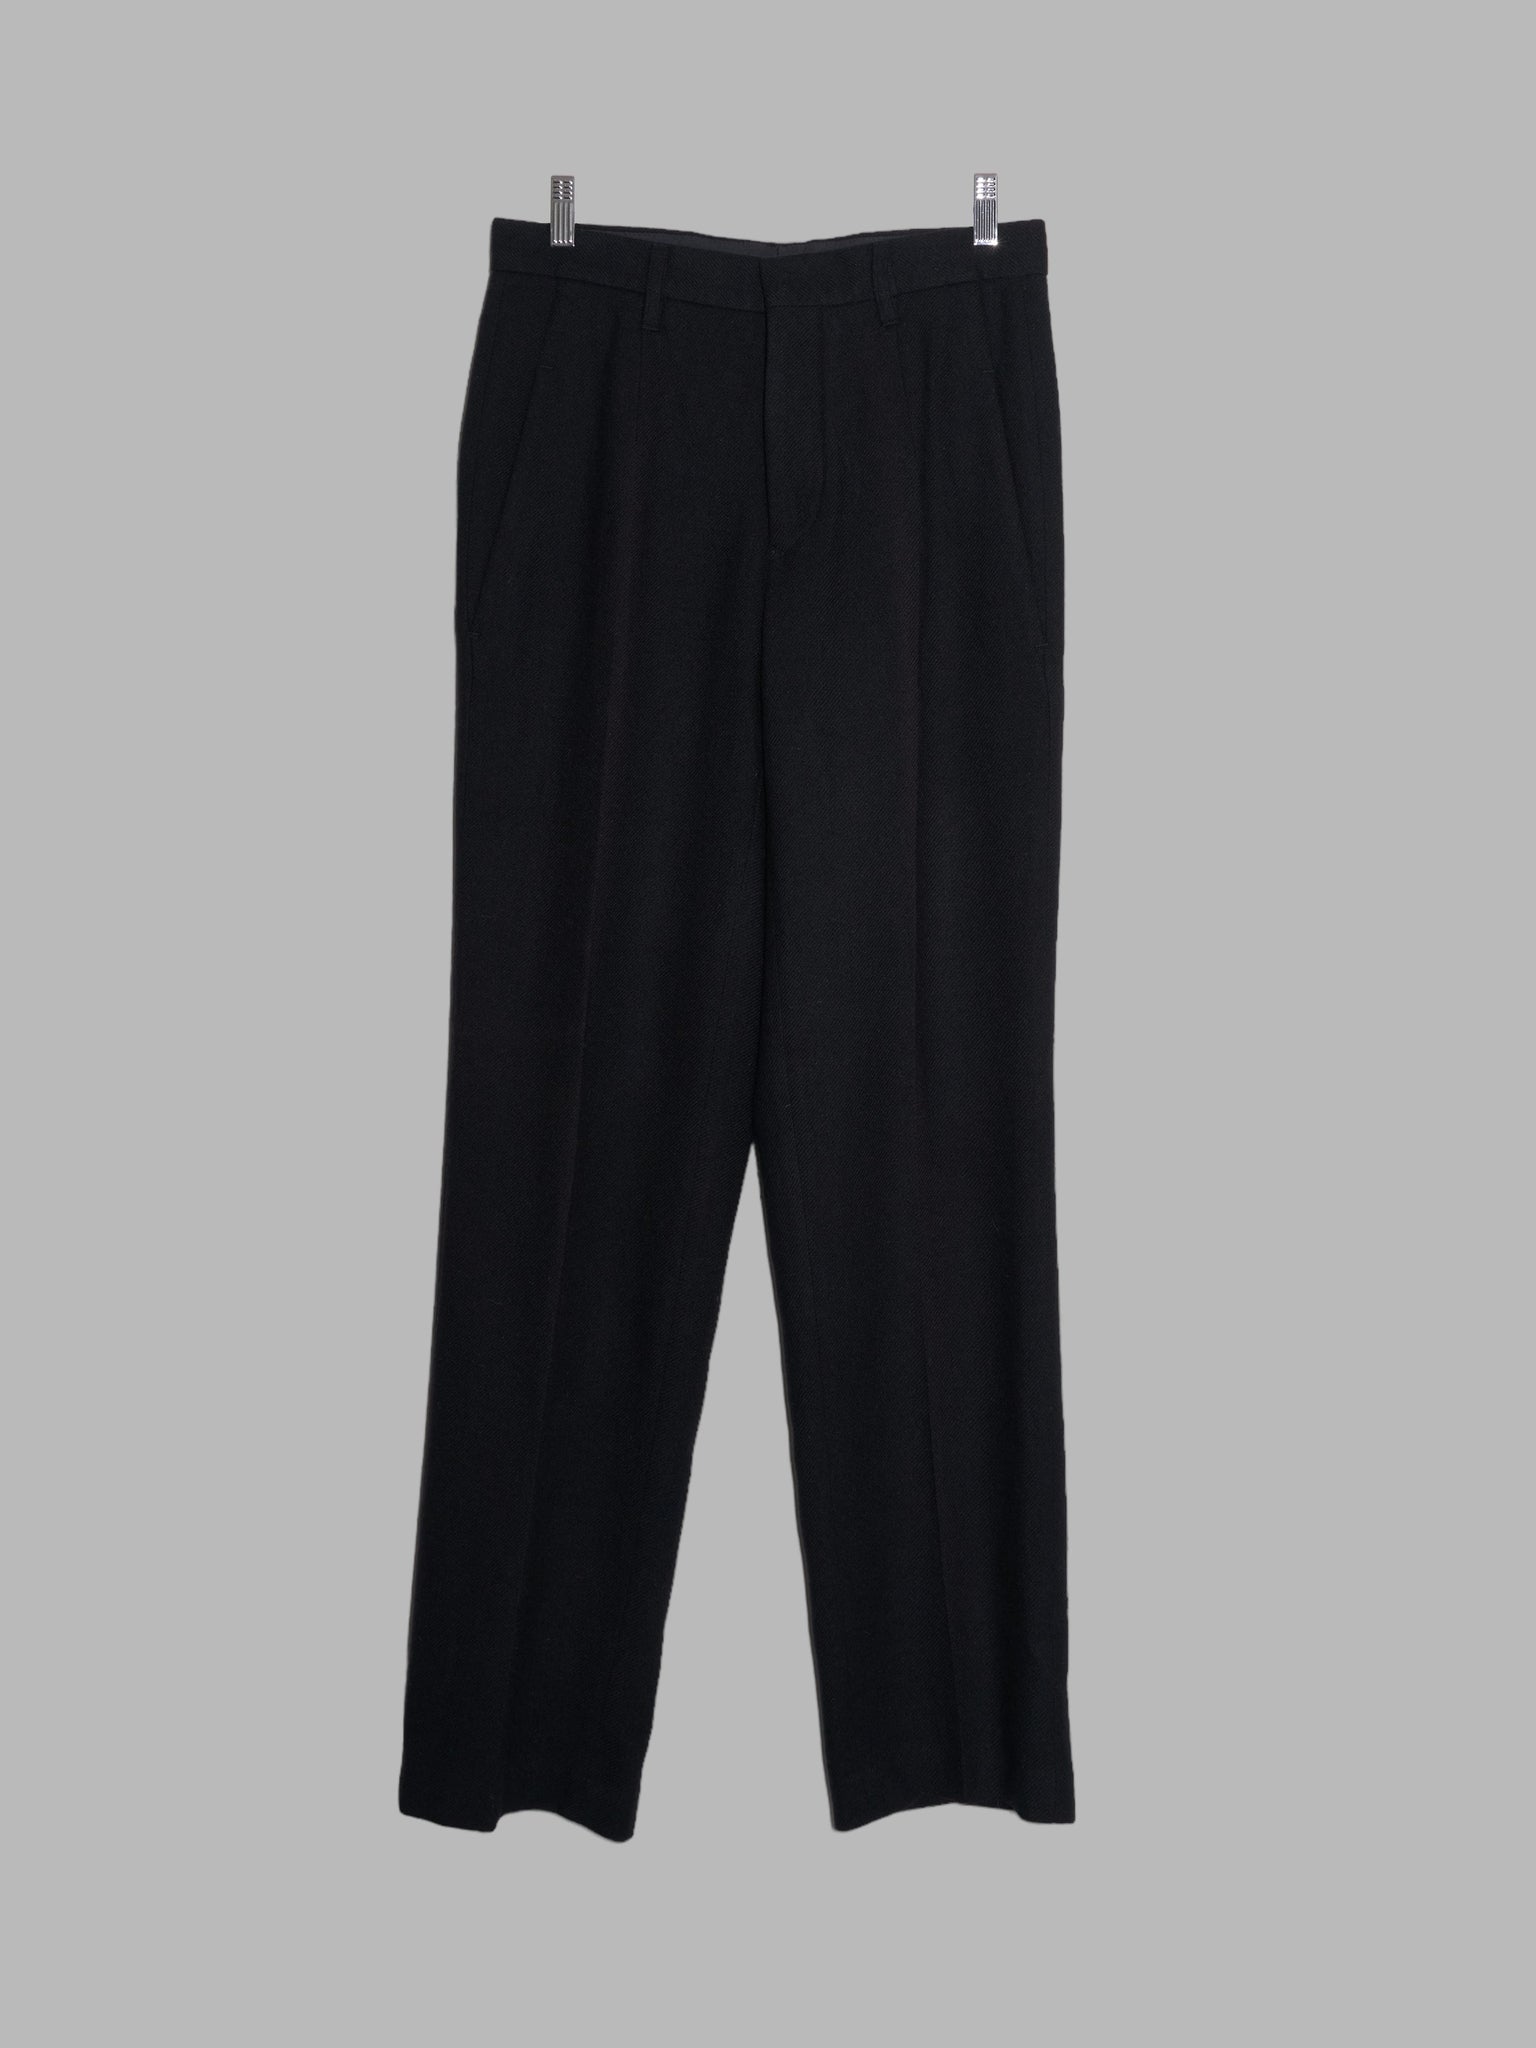 Dirk Bikkembergs 1990s 2000s black wool cashmere pleated trousers